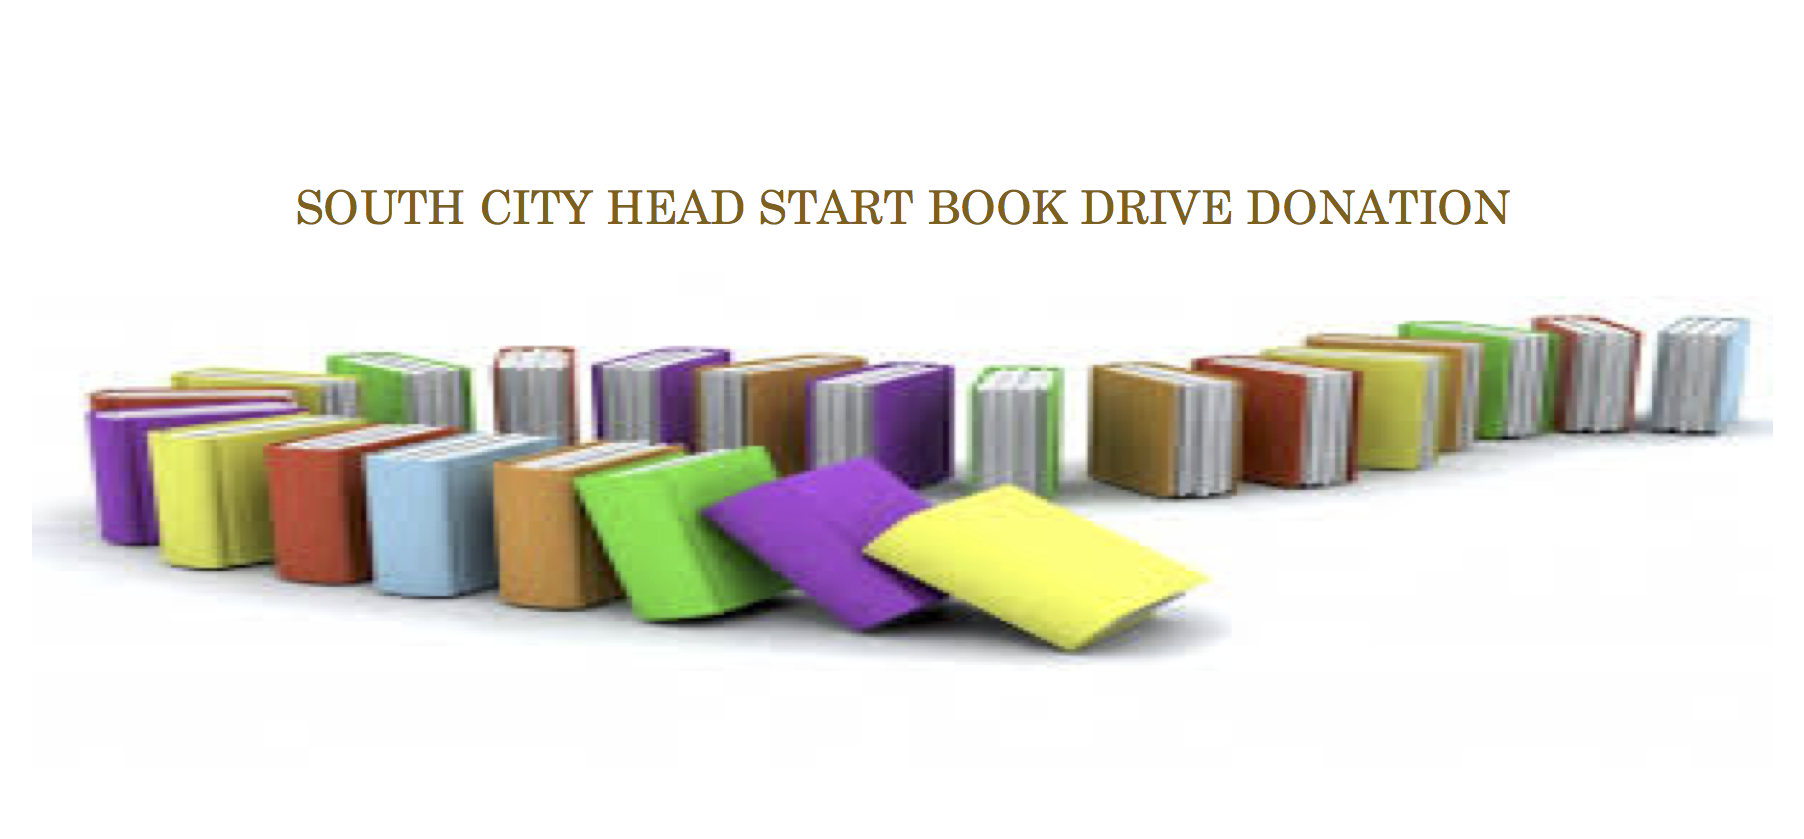 South City Head Start Book Drive Donation